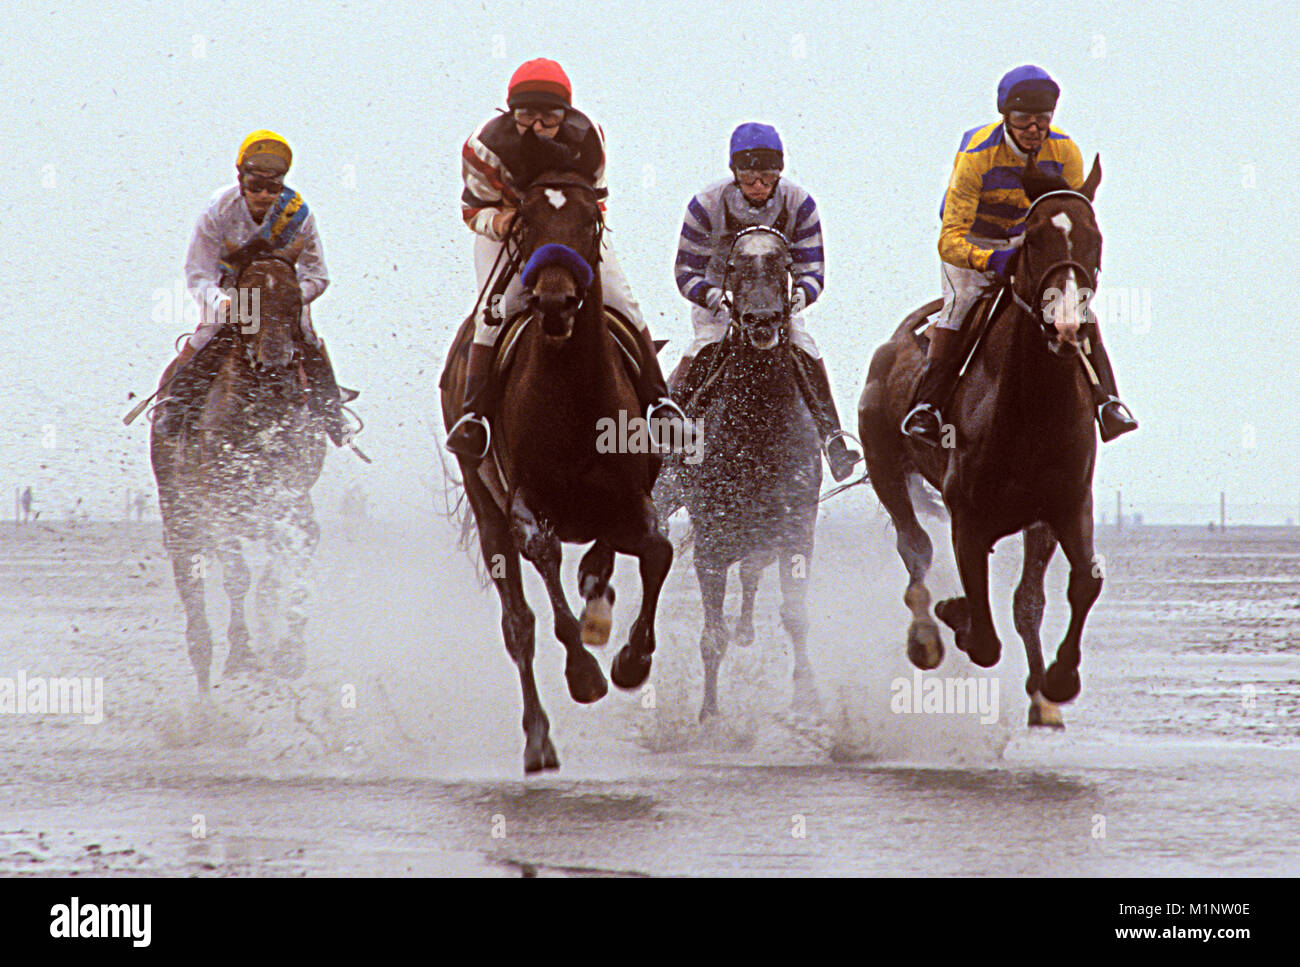 Germany, Lower Saxony, the horse race at the tidal shallows in Duhnen near Cuxhaven.  Deutschland, Niedersachsen, das Duhner Wattrennen bei Cuxhaven. Stock Photo